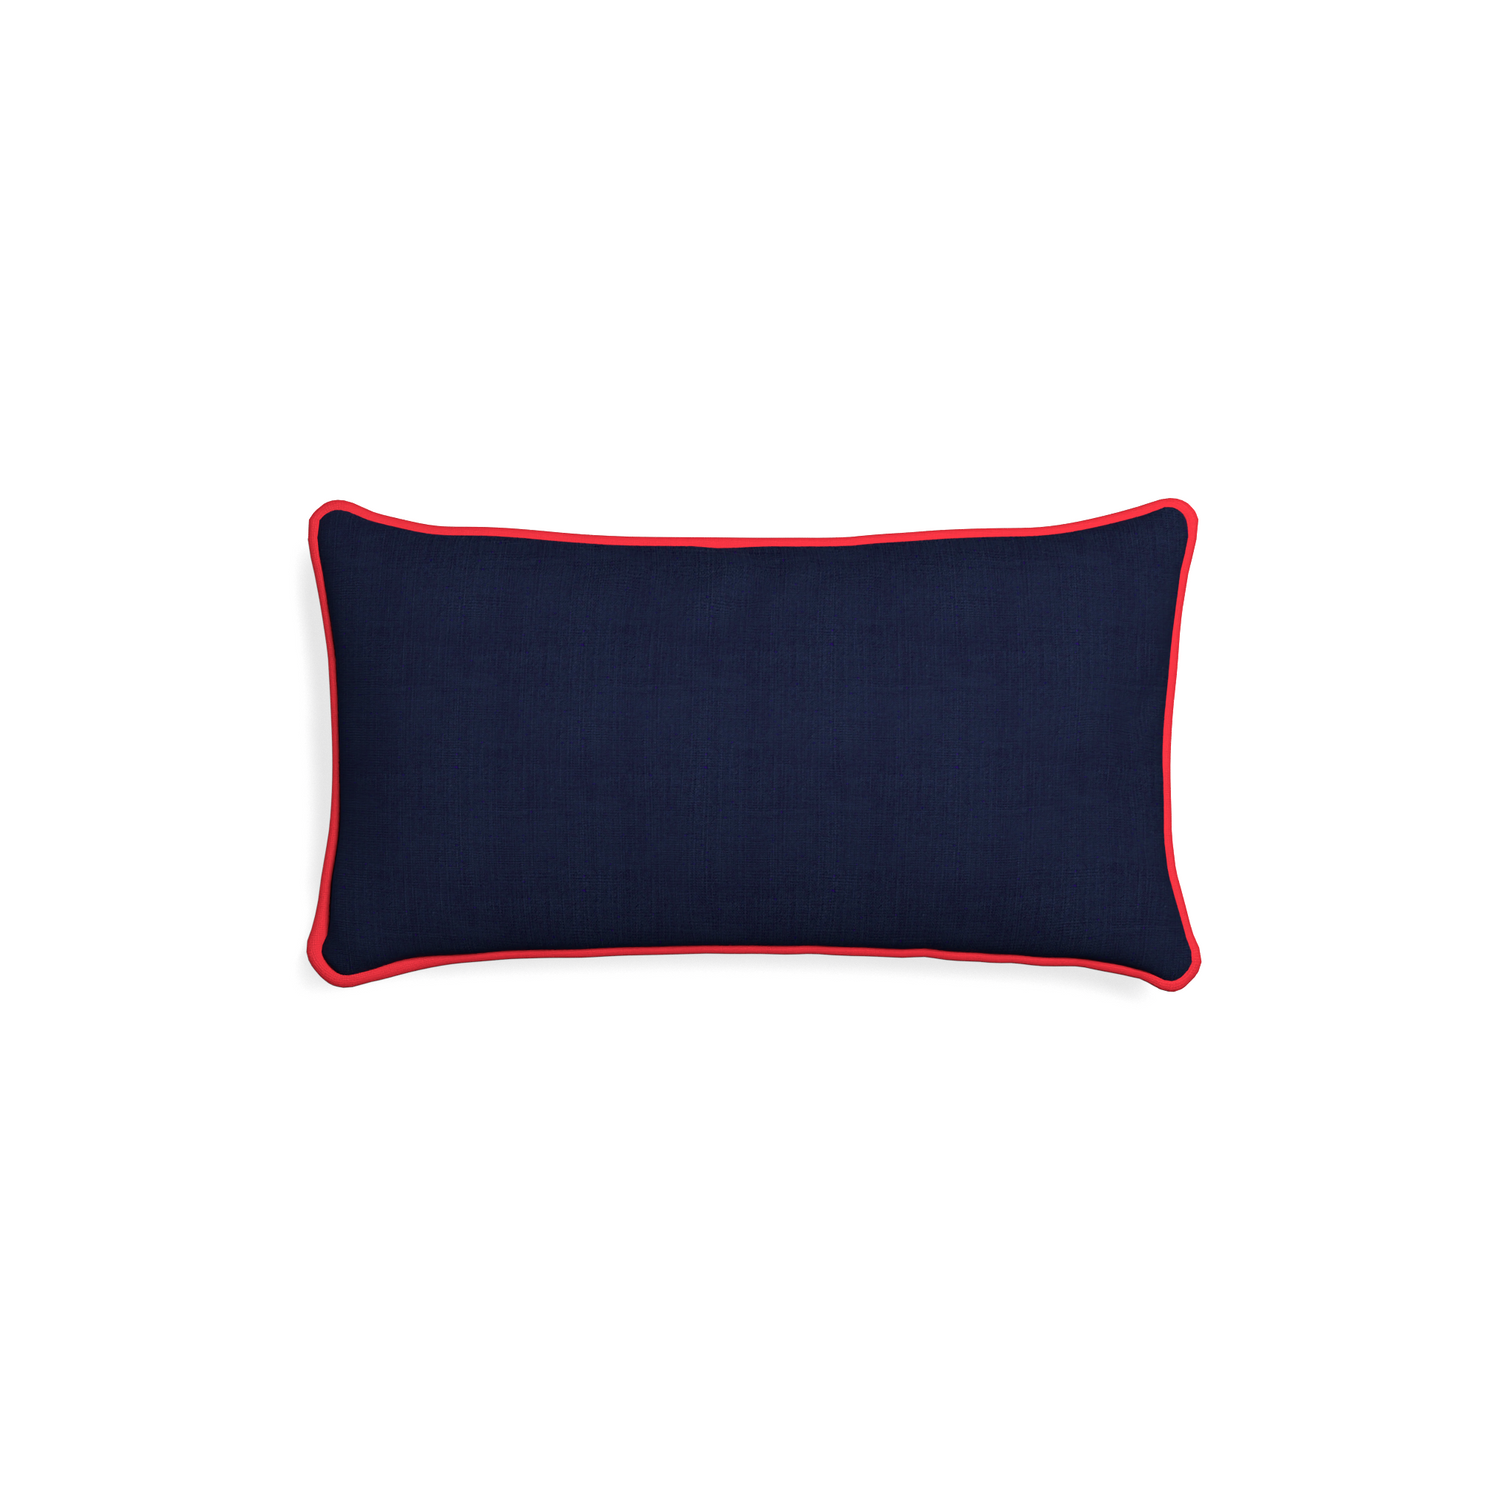 Petite-lumbar midnight custom navy bluepillow with cherry piping on white background